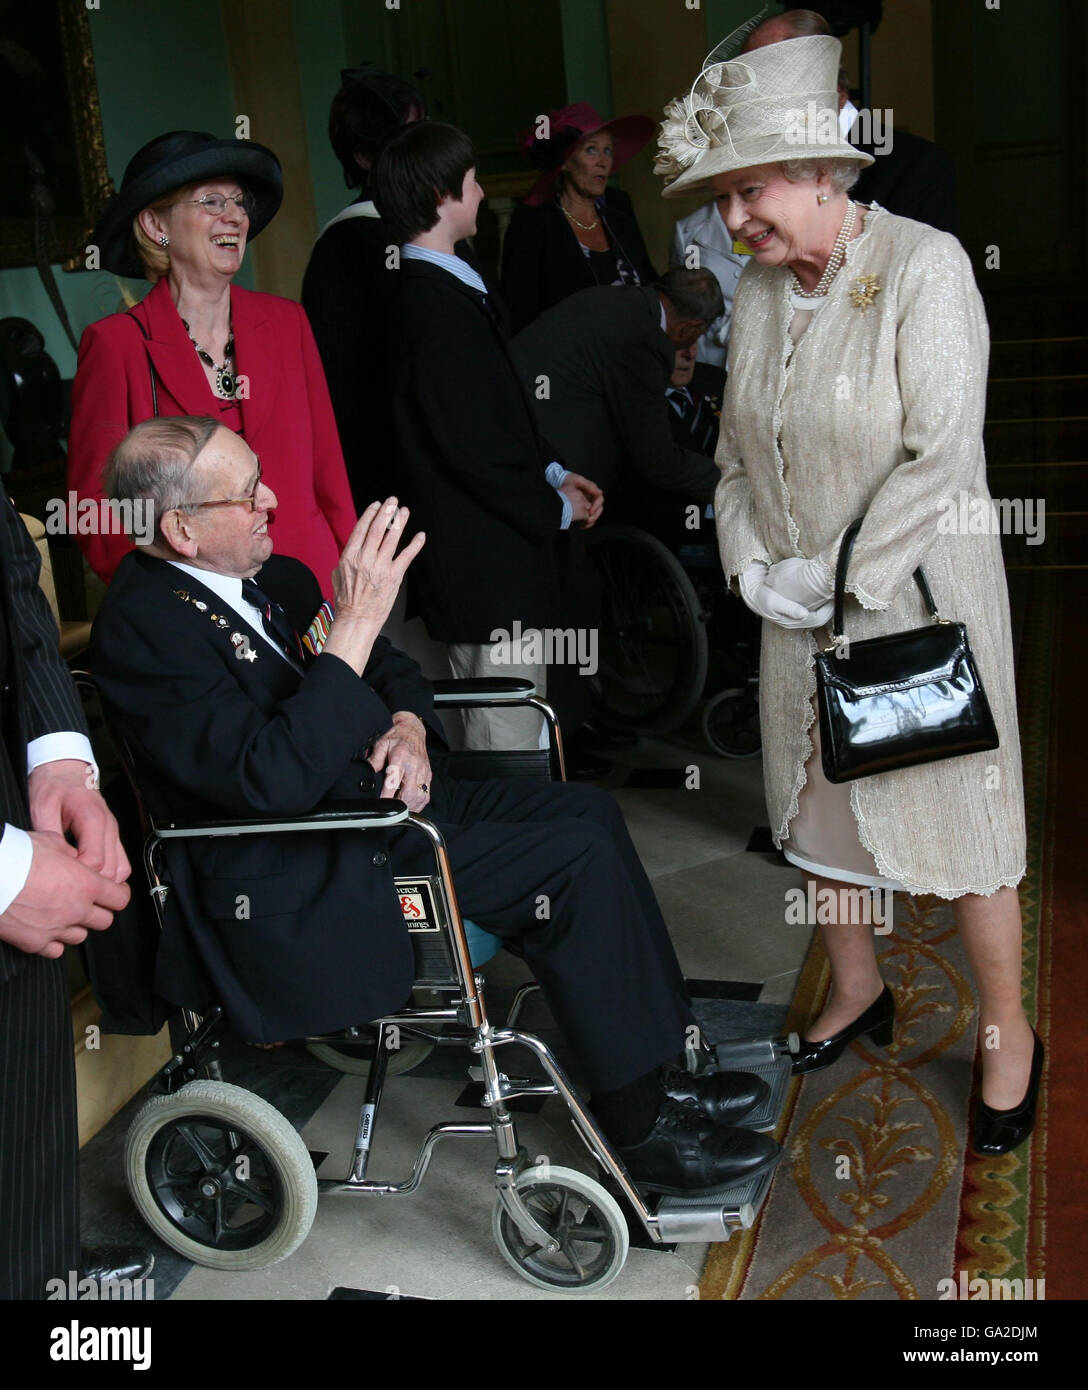 Britain's Queen Elizabeth II (right) meets one of the only three surviving soldiers from the First World War, 106 year old William Stone (left), at the Buckingham Palace Garden Party in London. Stock Photo